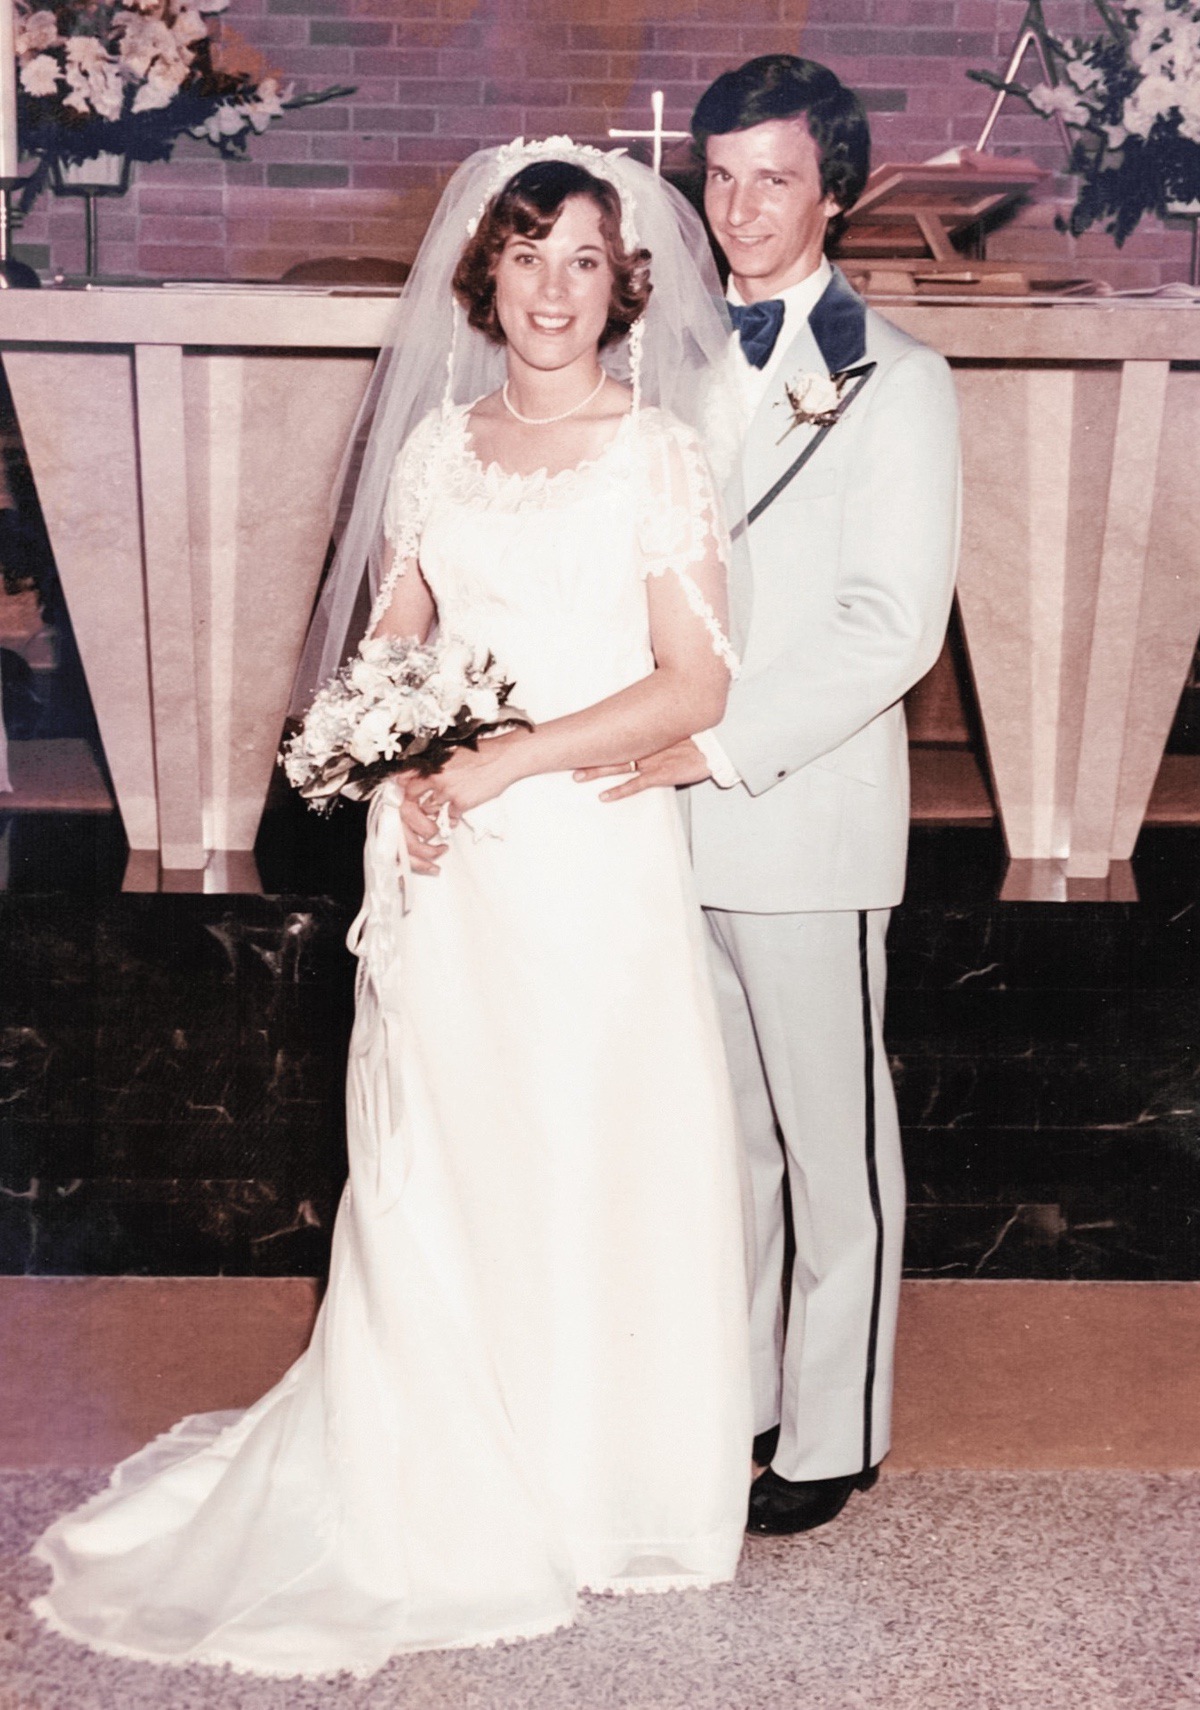 Mike and Cathy Verzal on their wedding night in 1976. (Photo provided)